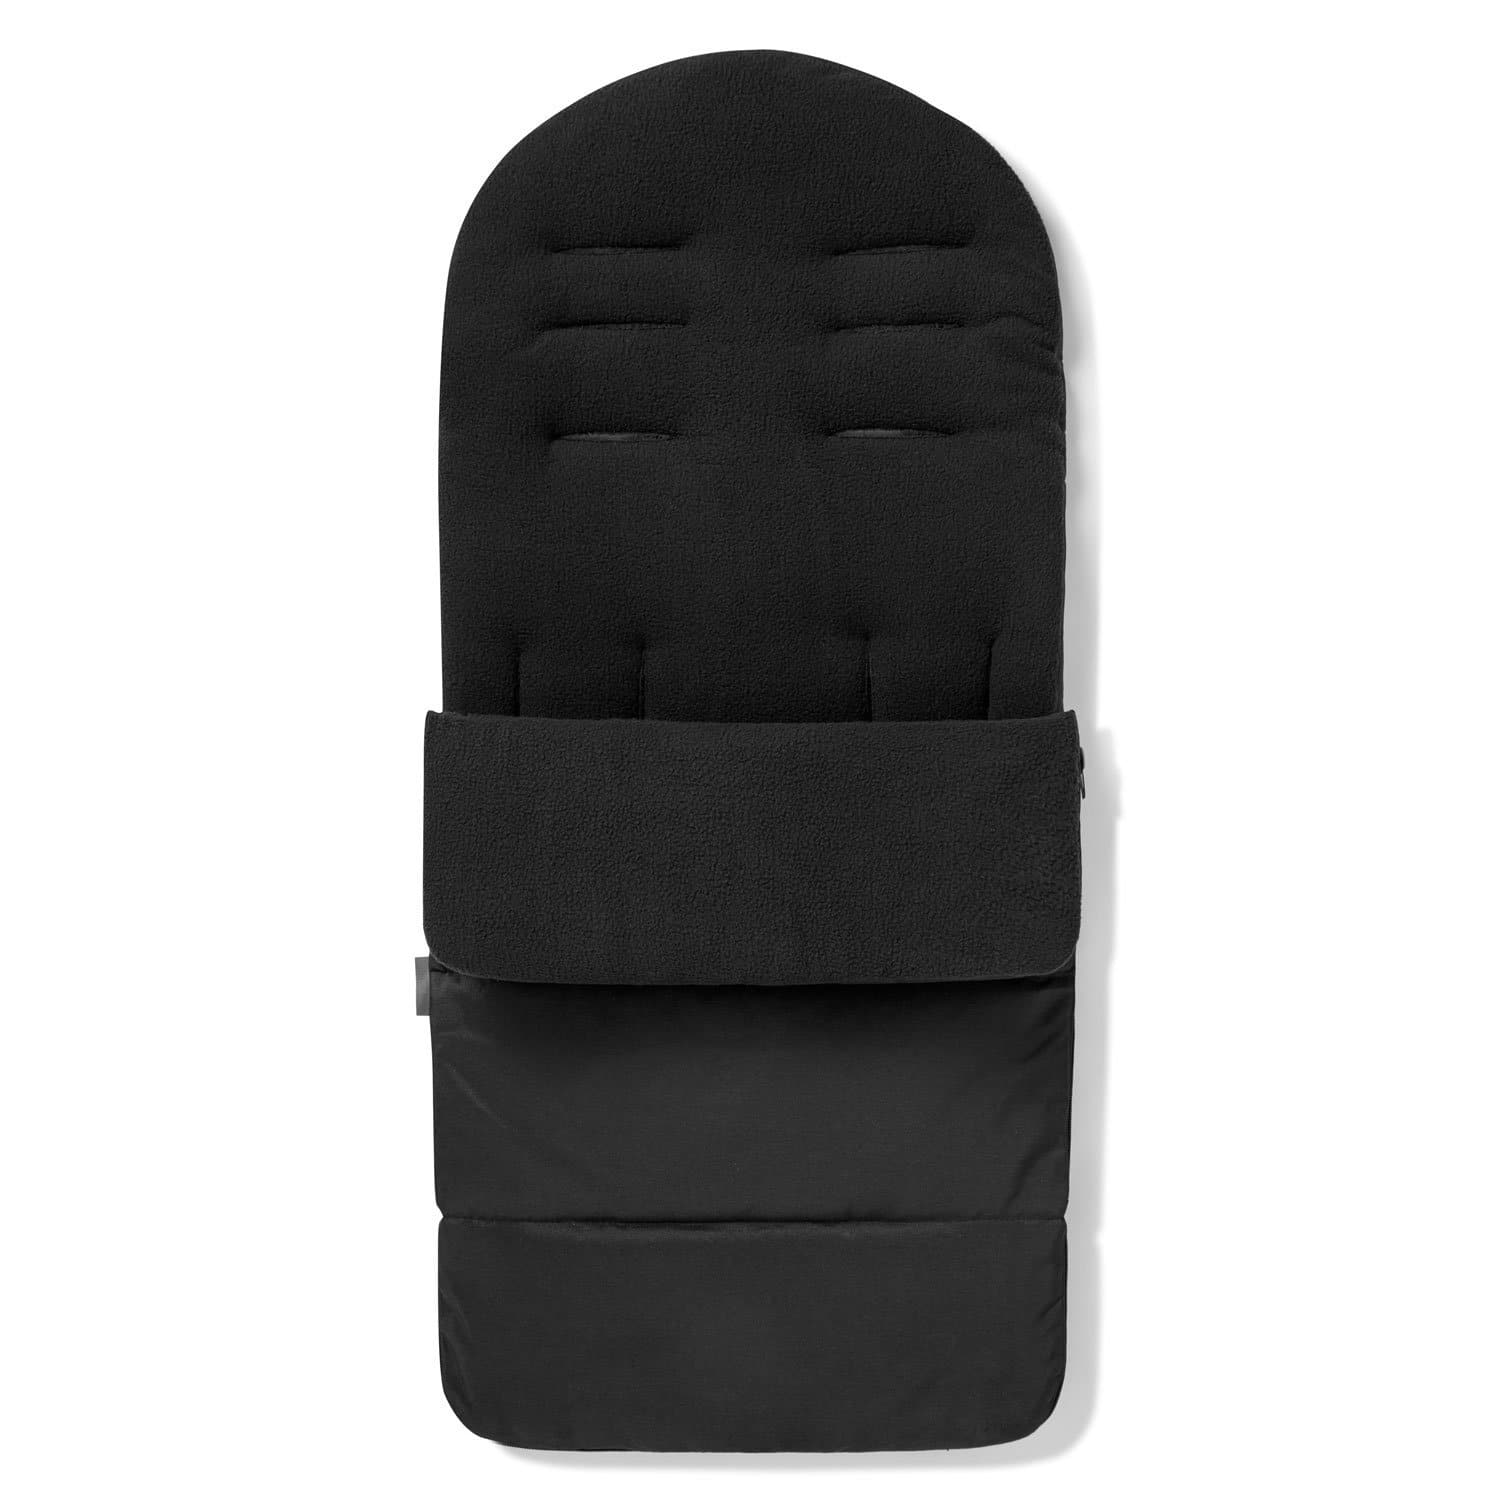 Premium Footmuff / Cosy Toes Compatible with Britax - Black Jack / Fits All Models | For Your Little One